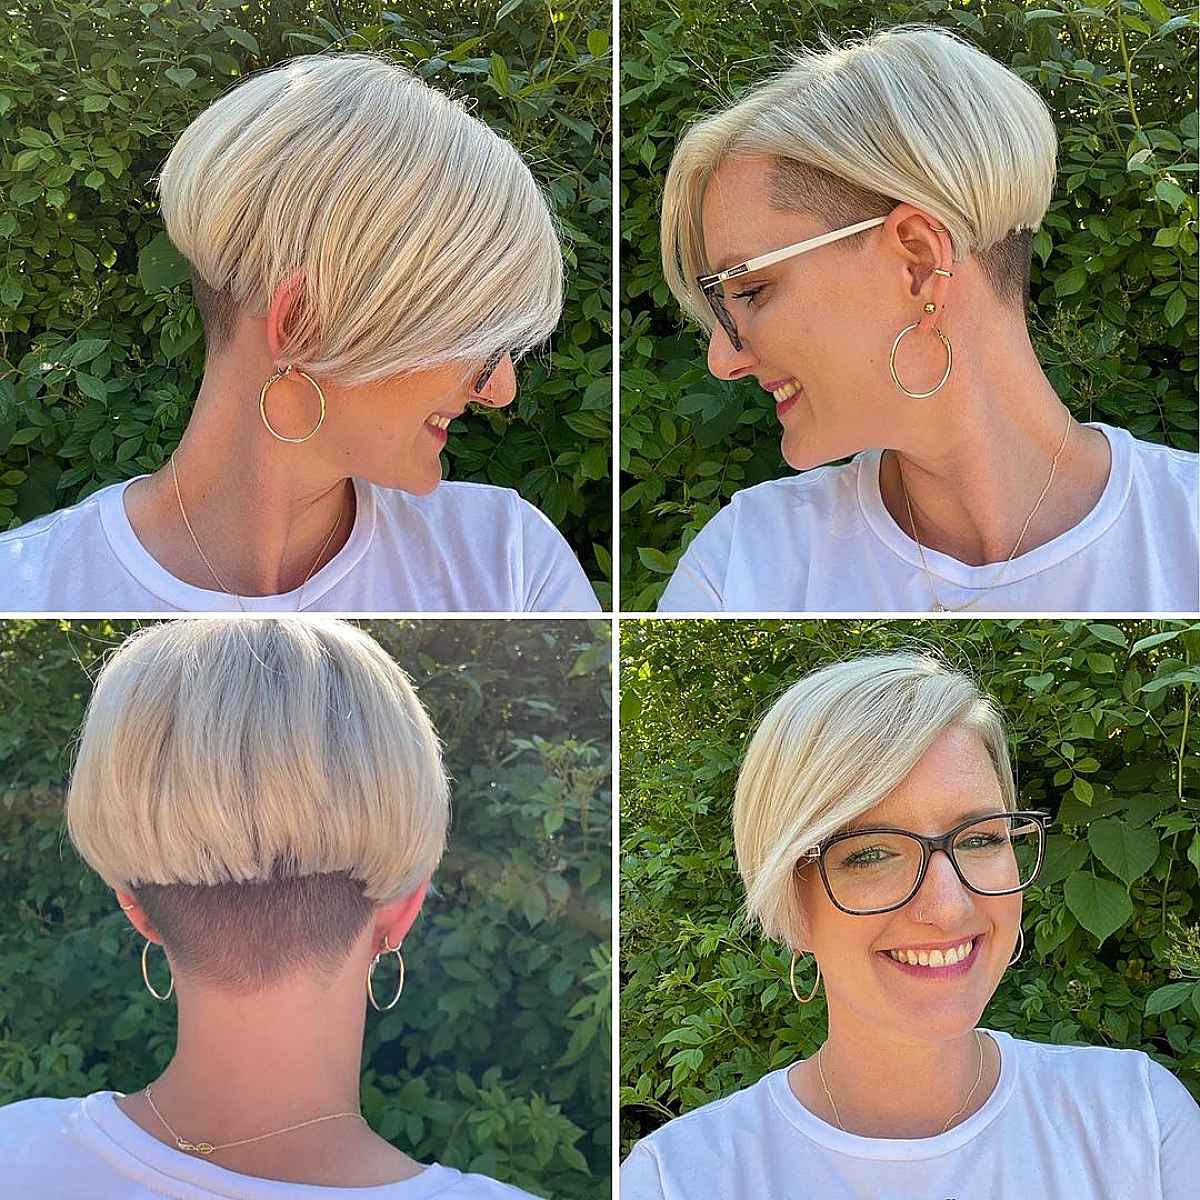 19 Undercut Pixie Bob Haircuts To Consider for a Short &#038; Easy Cut to Style